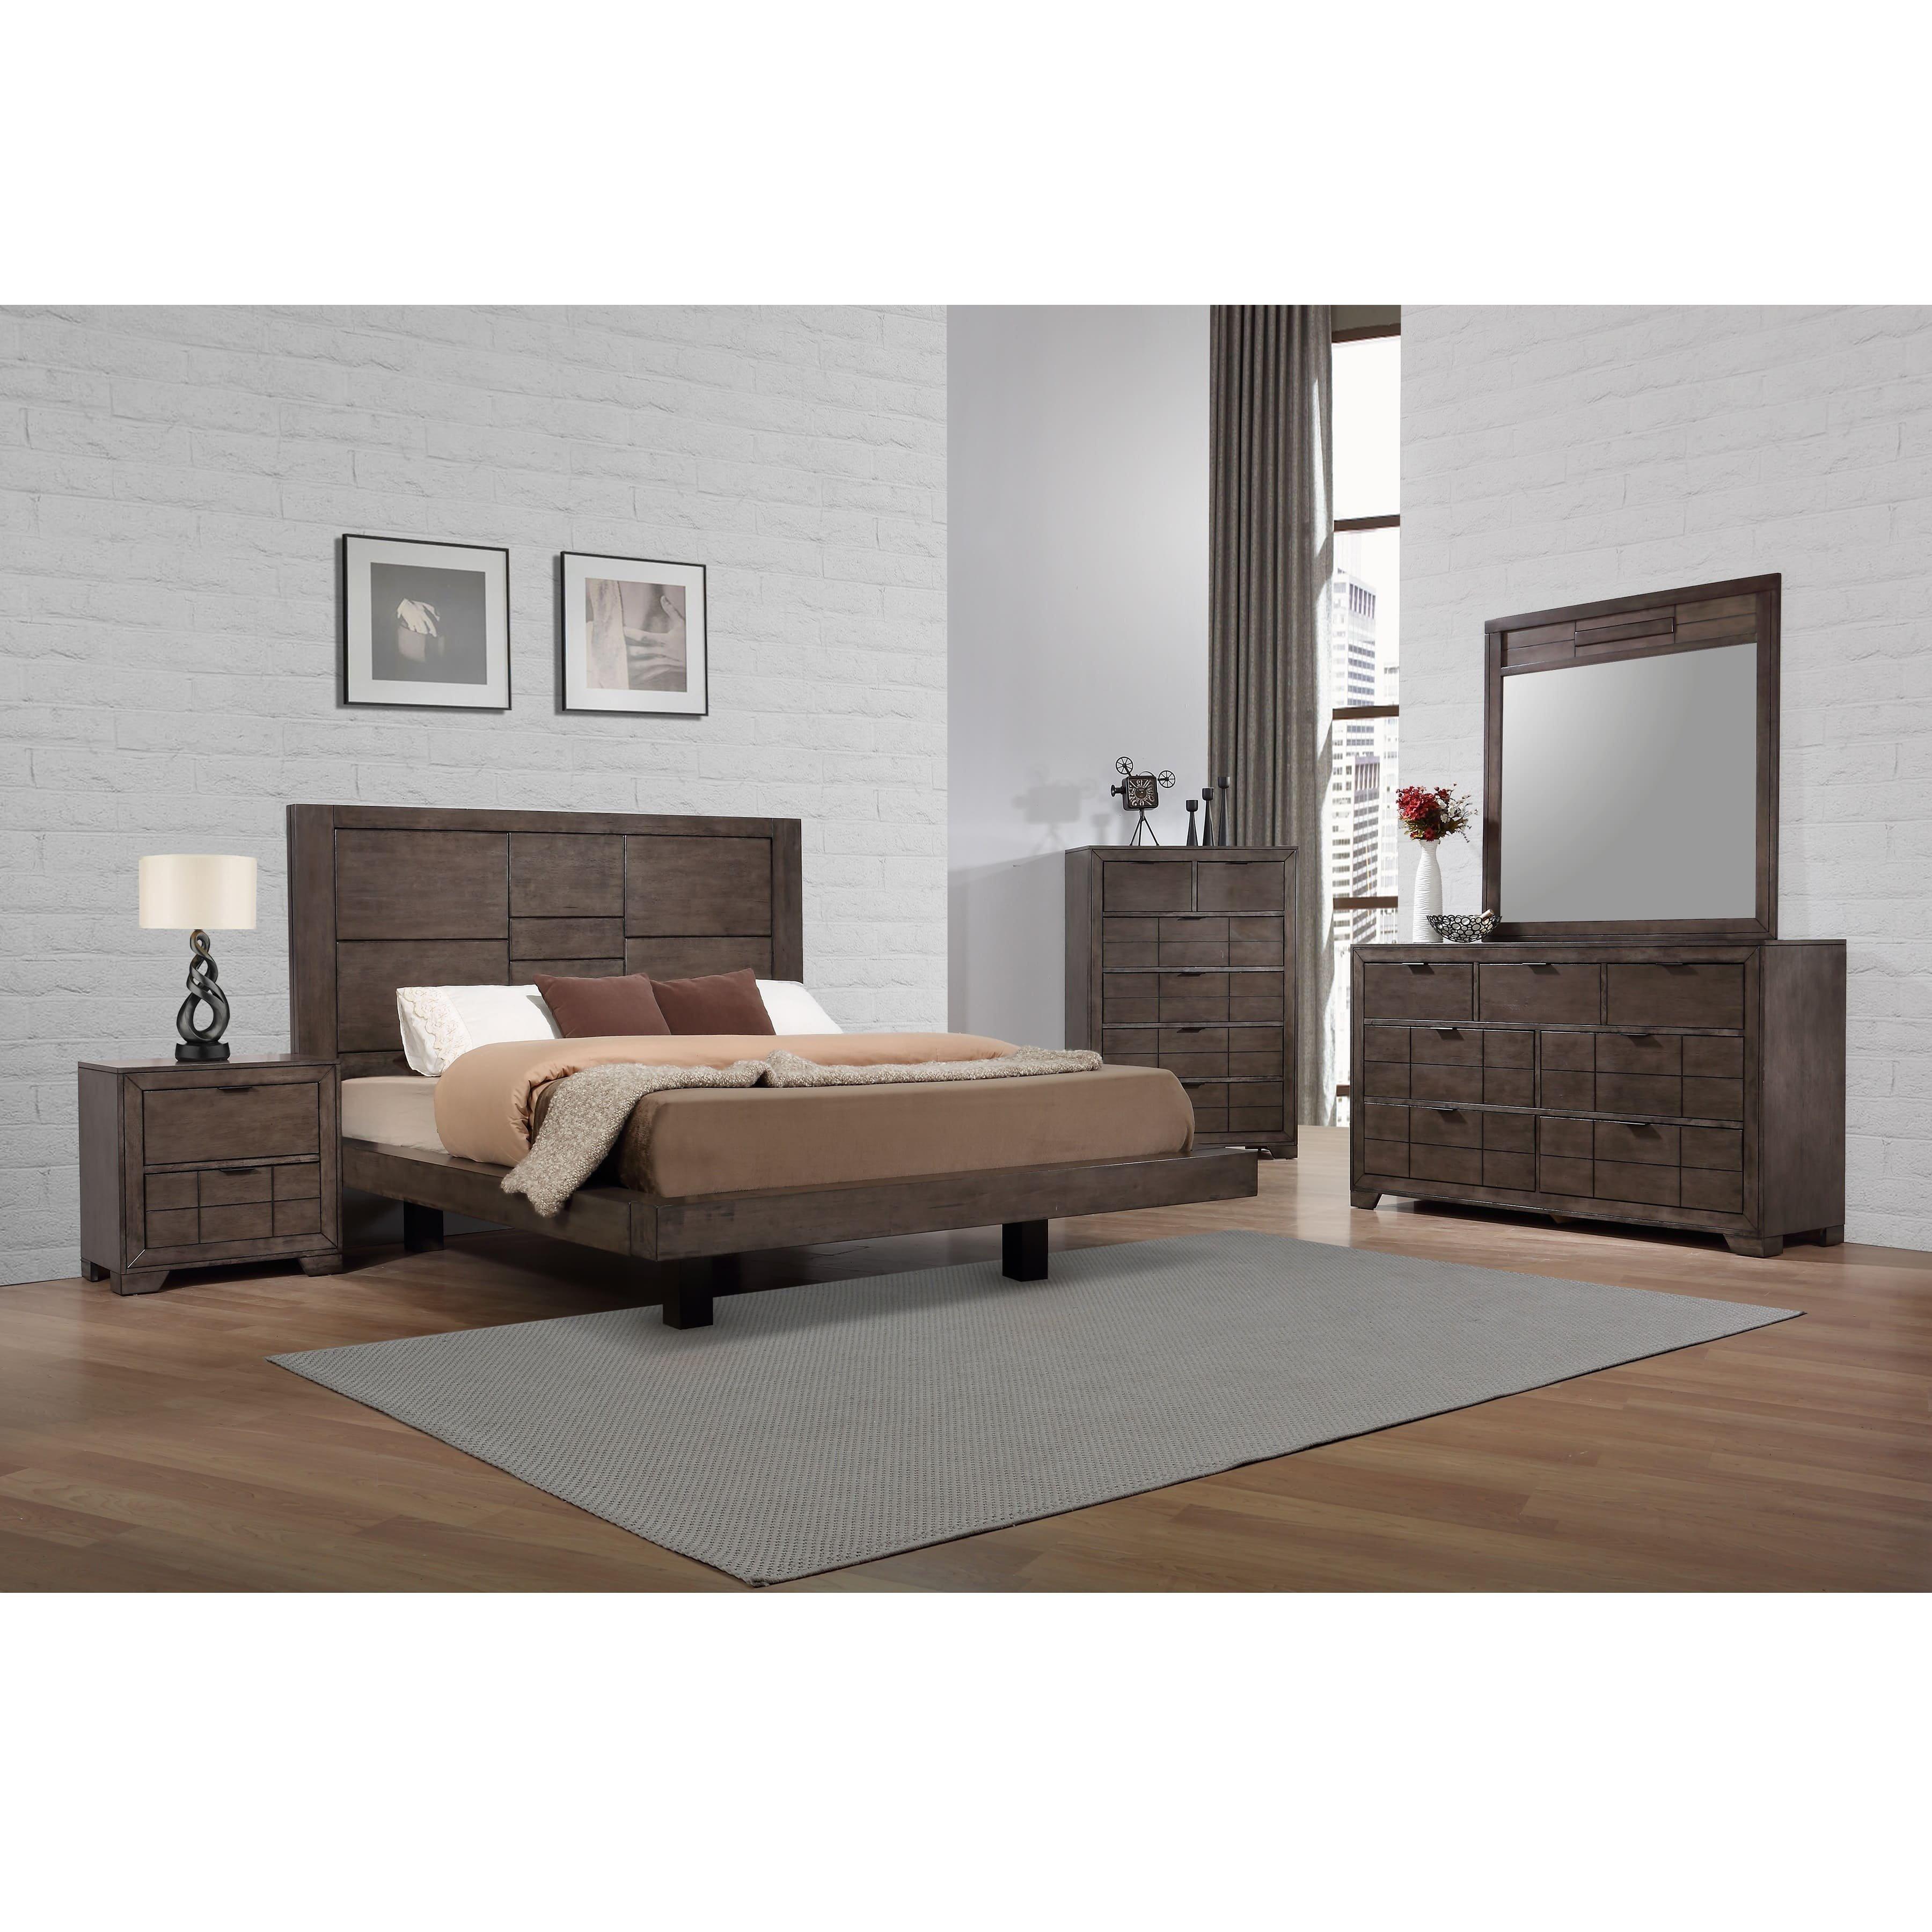 Rent To Own Elements International 9 Piece Logic King Bedroom Set W Woodhaven Pillow Top Plush Mattress At Aaron S Today